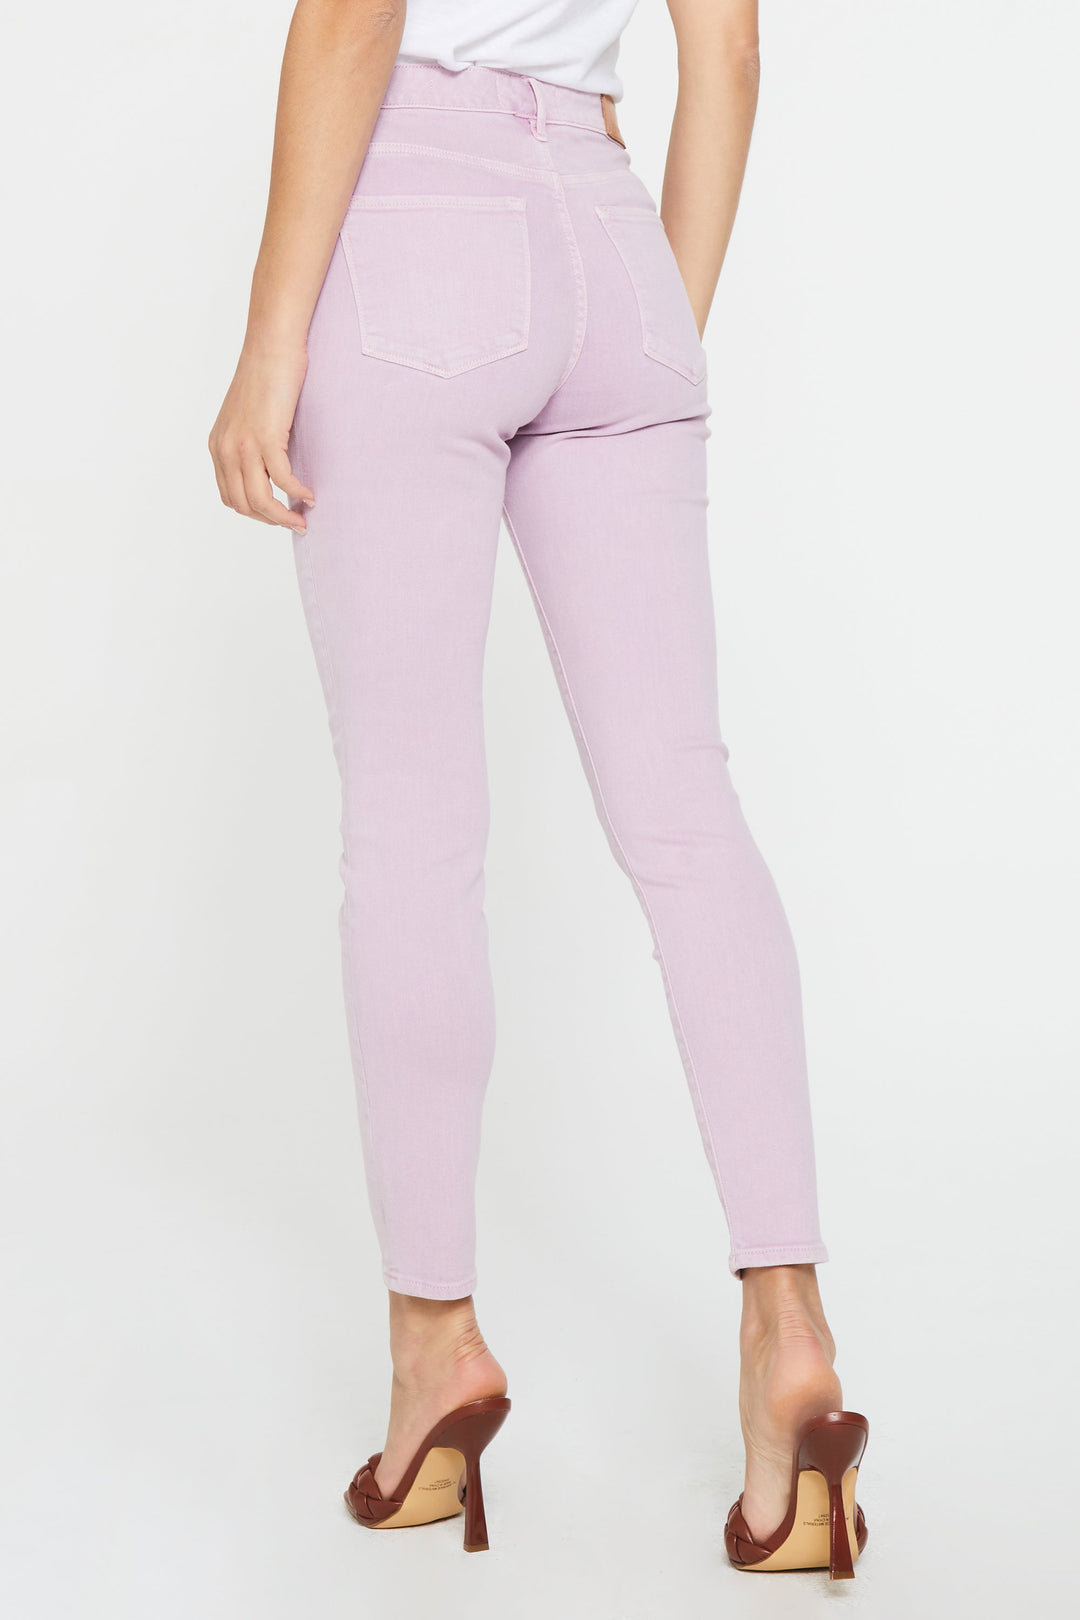 image of a female model wearing a GISELE HIGH RISE ANKLE SKINNY JEANS LAVENDER PINK JEANS